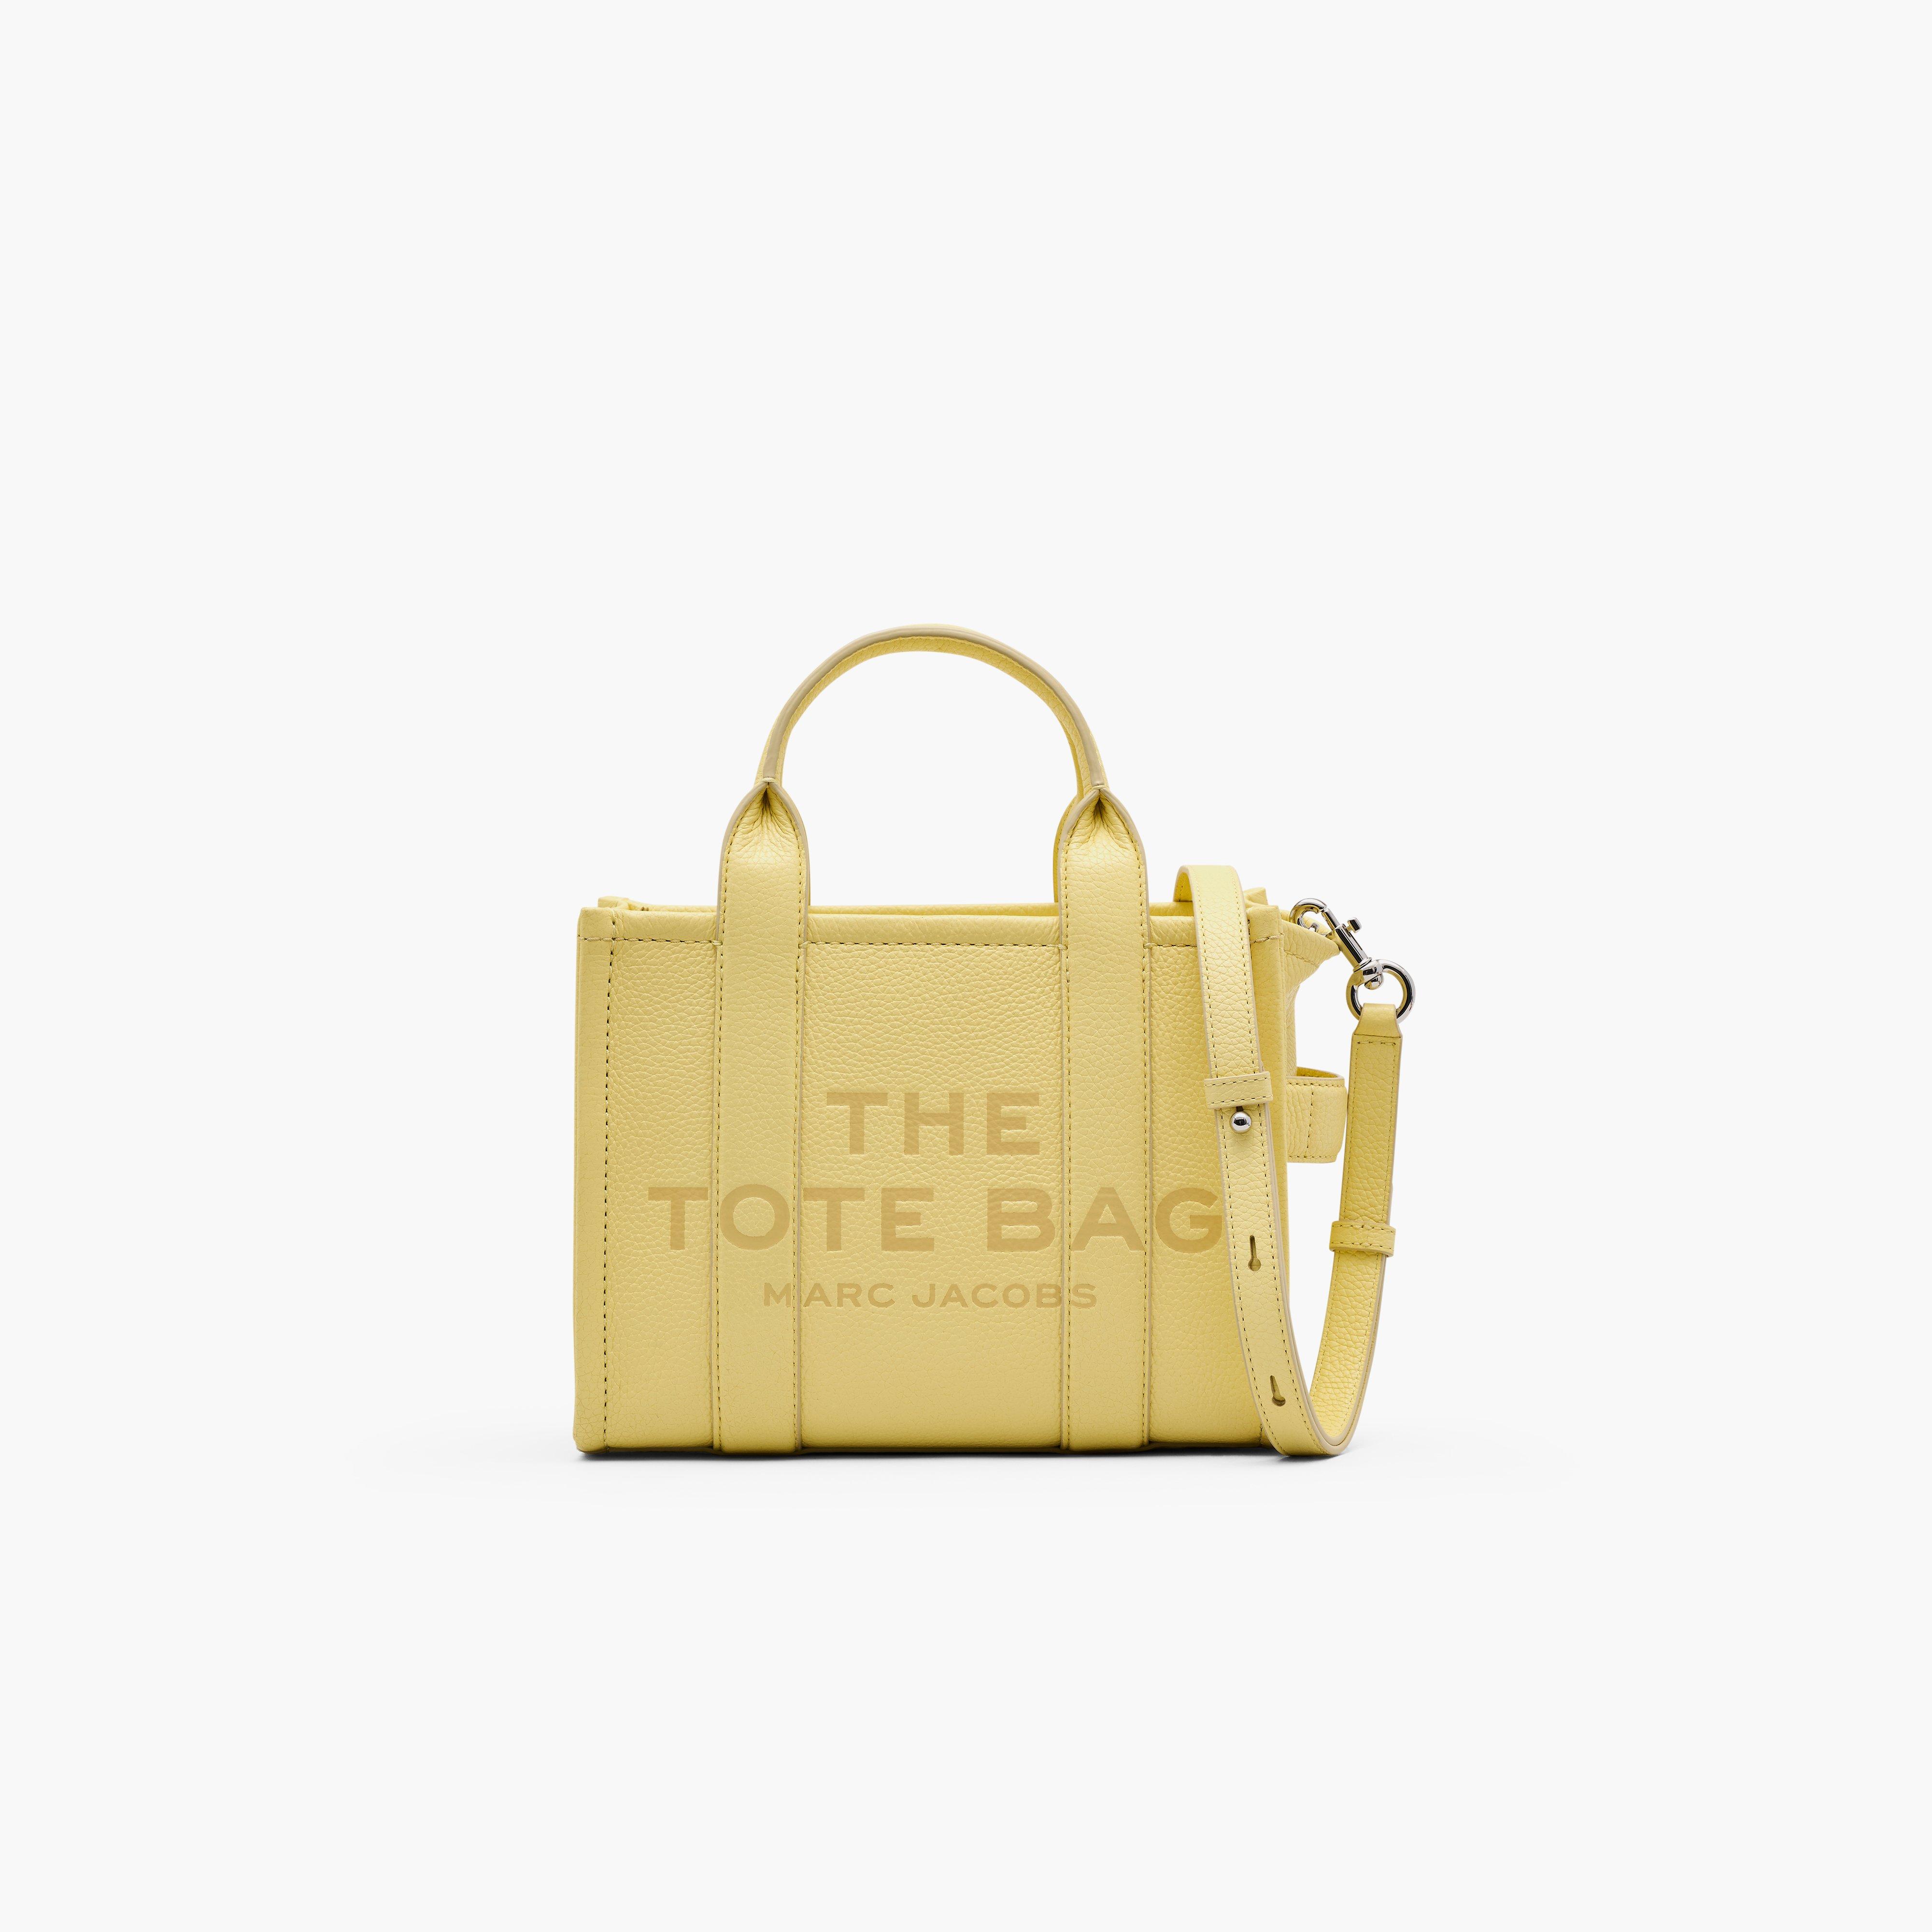 Marc by Marc jacobs The Leather Small Tote Bag,CUSTARD